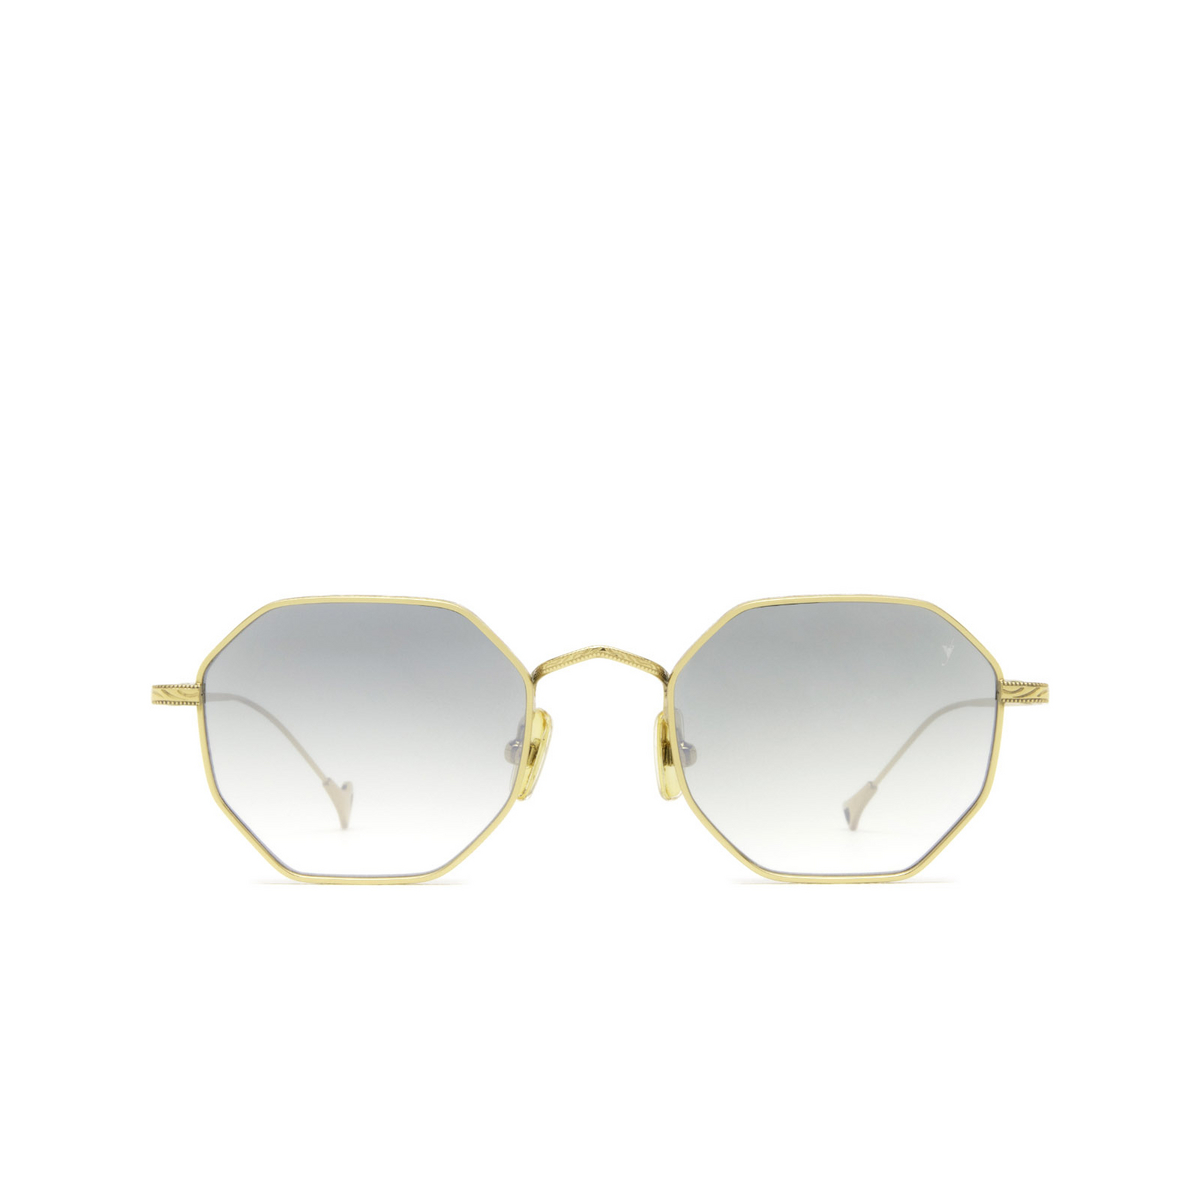 Eyepetizer® Irregular Sunglasses: Hort color Gold C.4-25F - front view.